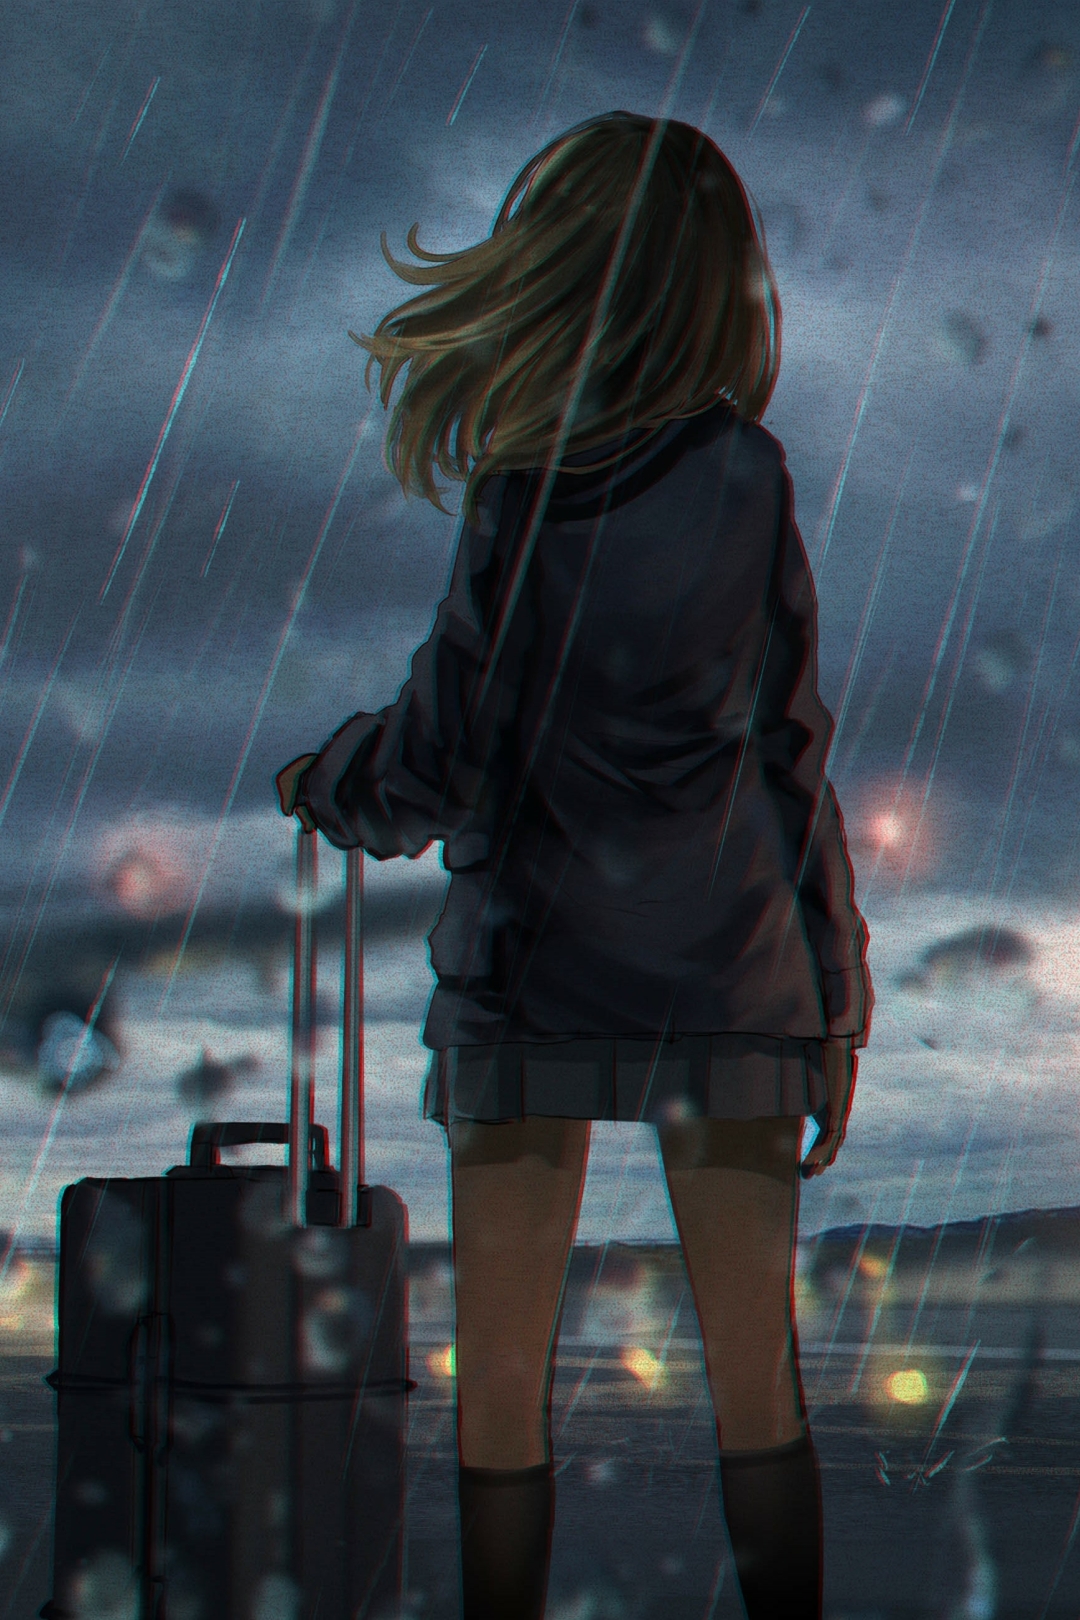 1080x1620 Alone in Airport 4K Rain 1080x1620 Resolution Wallpaper, HD  Artist 4K Wallpapers, Images, Photos and Background - Wallpapers Den